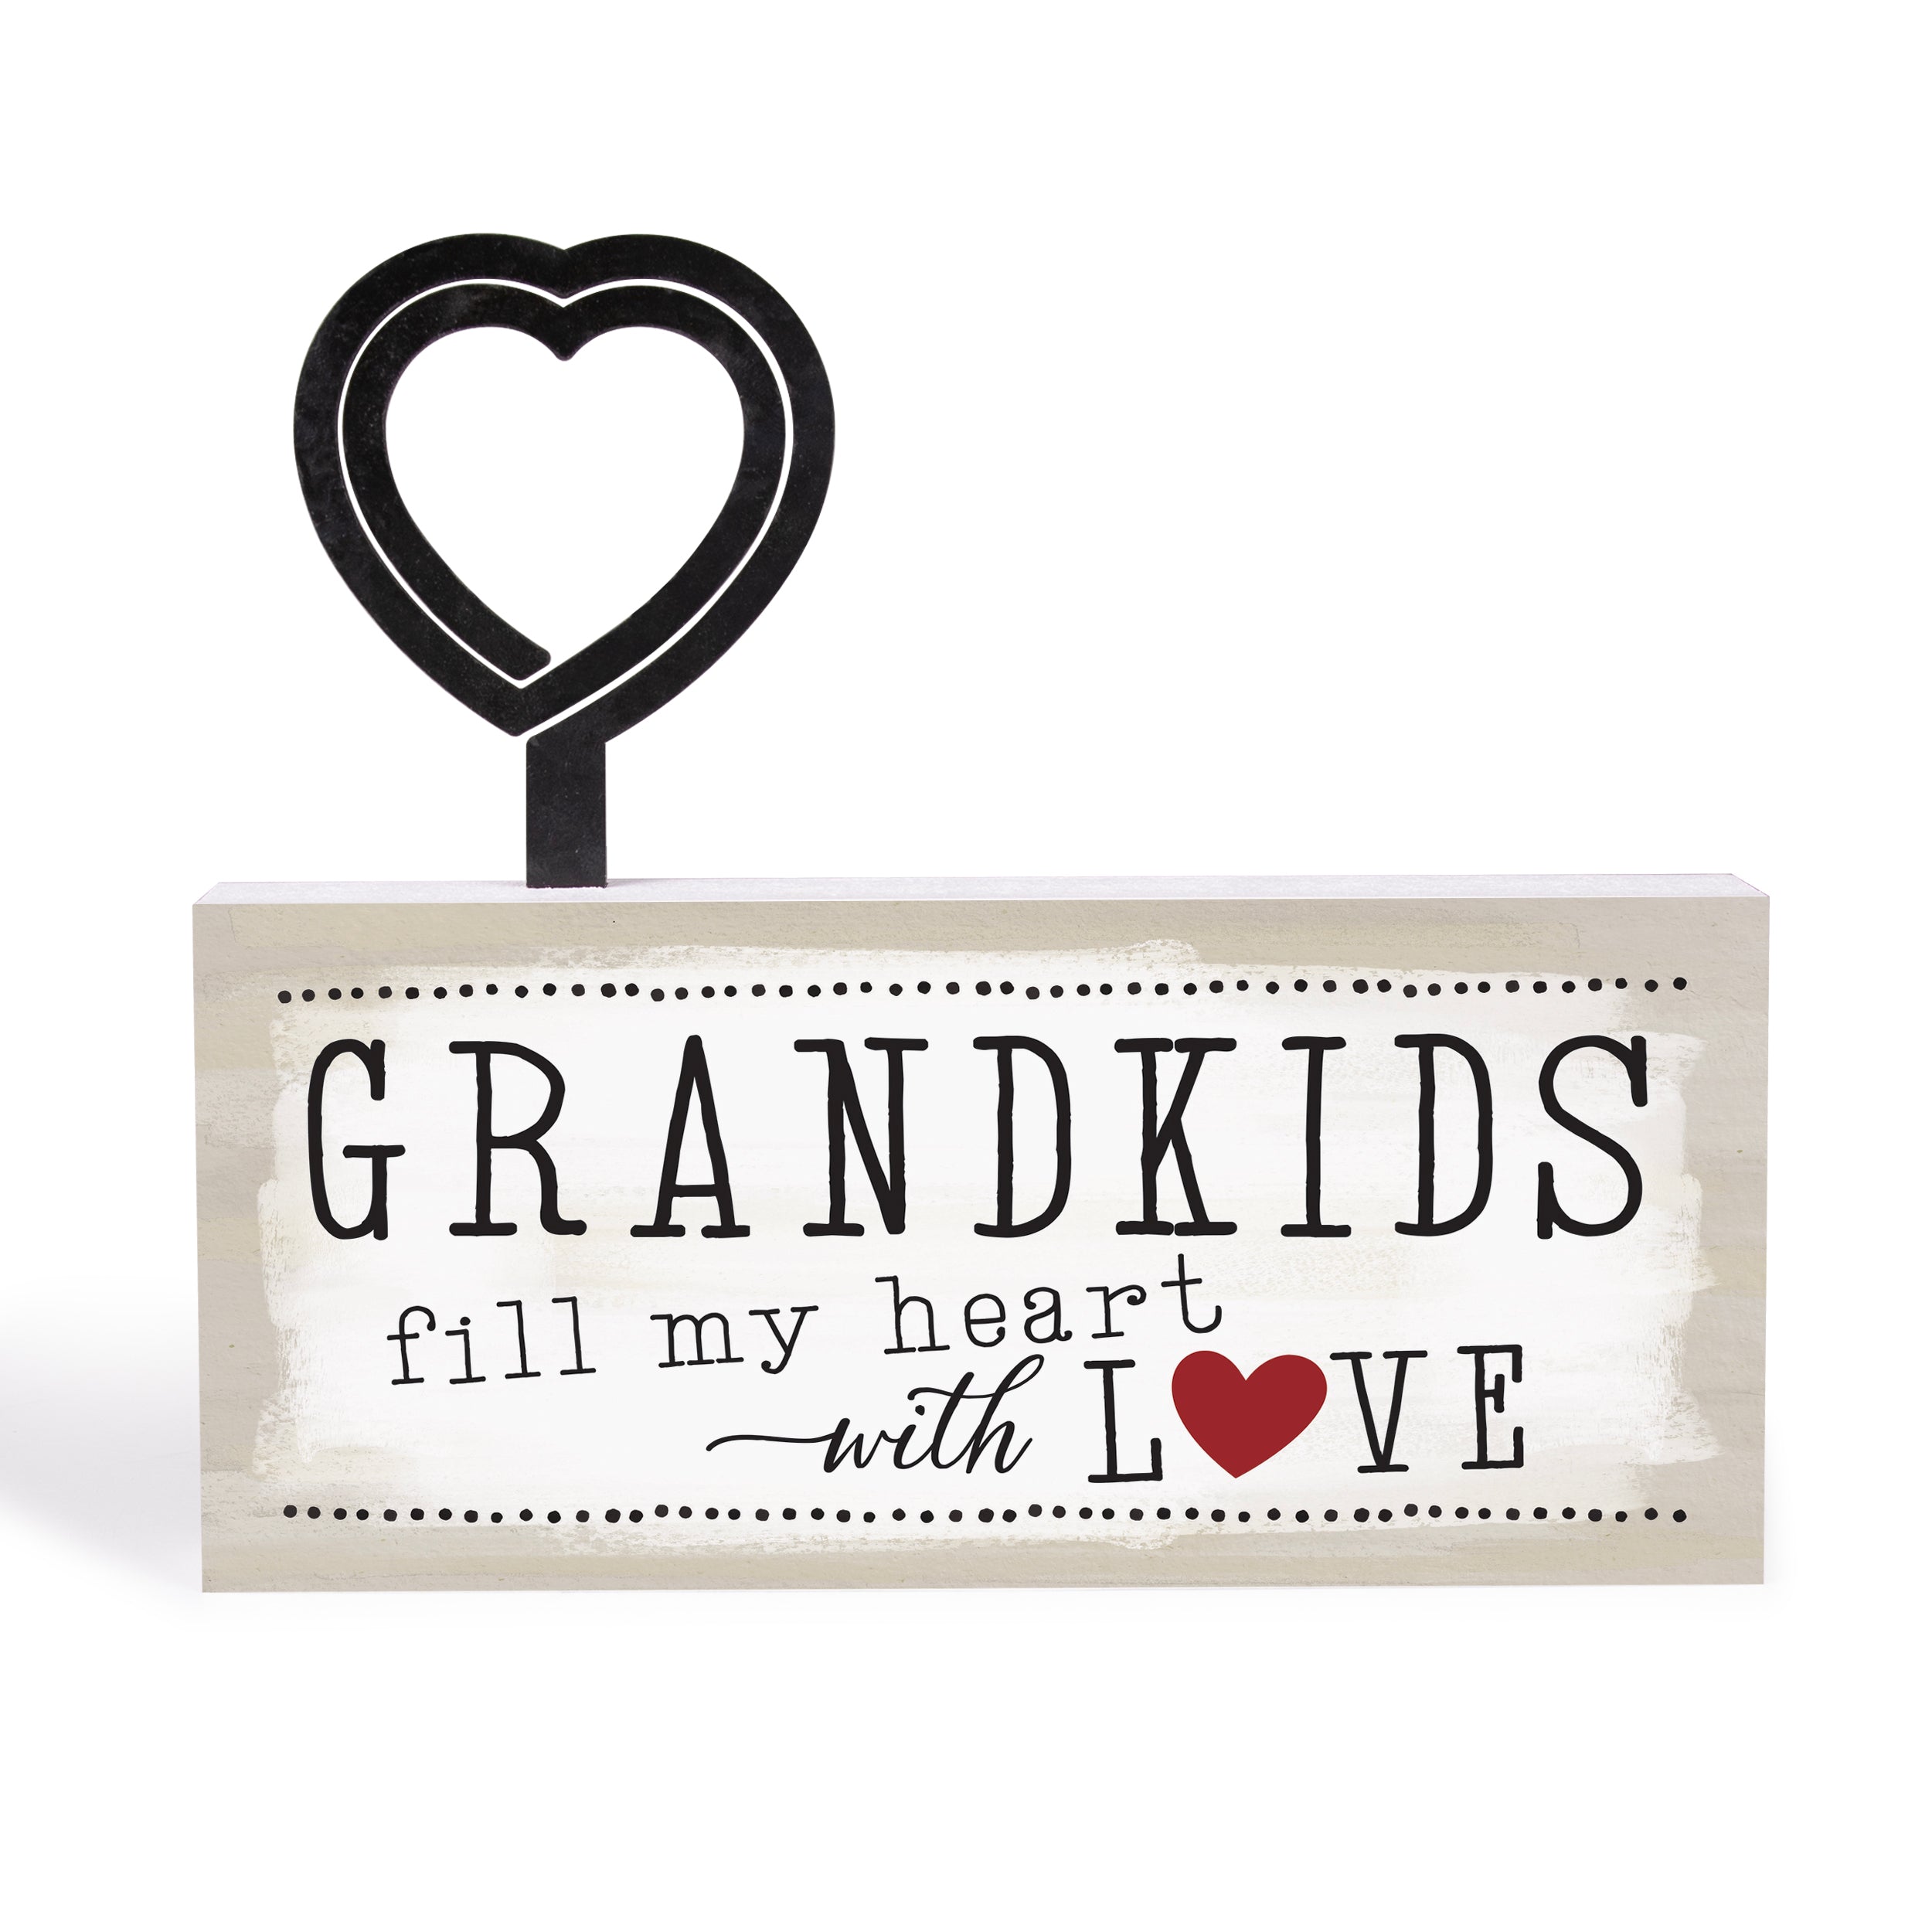 Grandkids Fill My Heart With Love Photo Frame